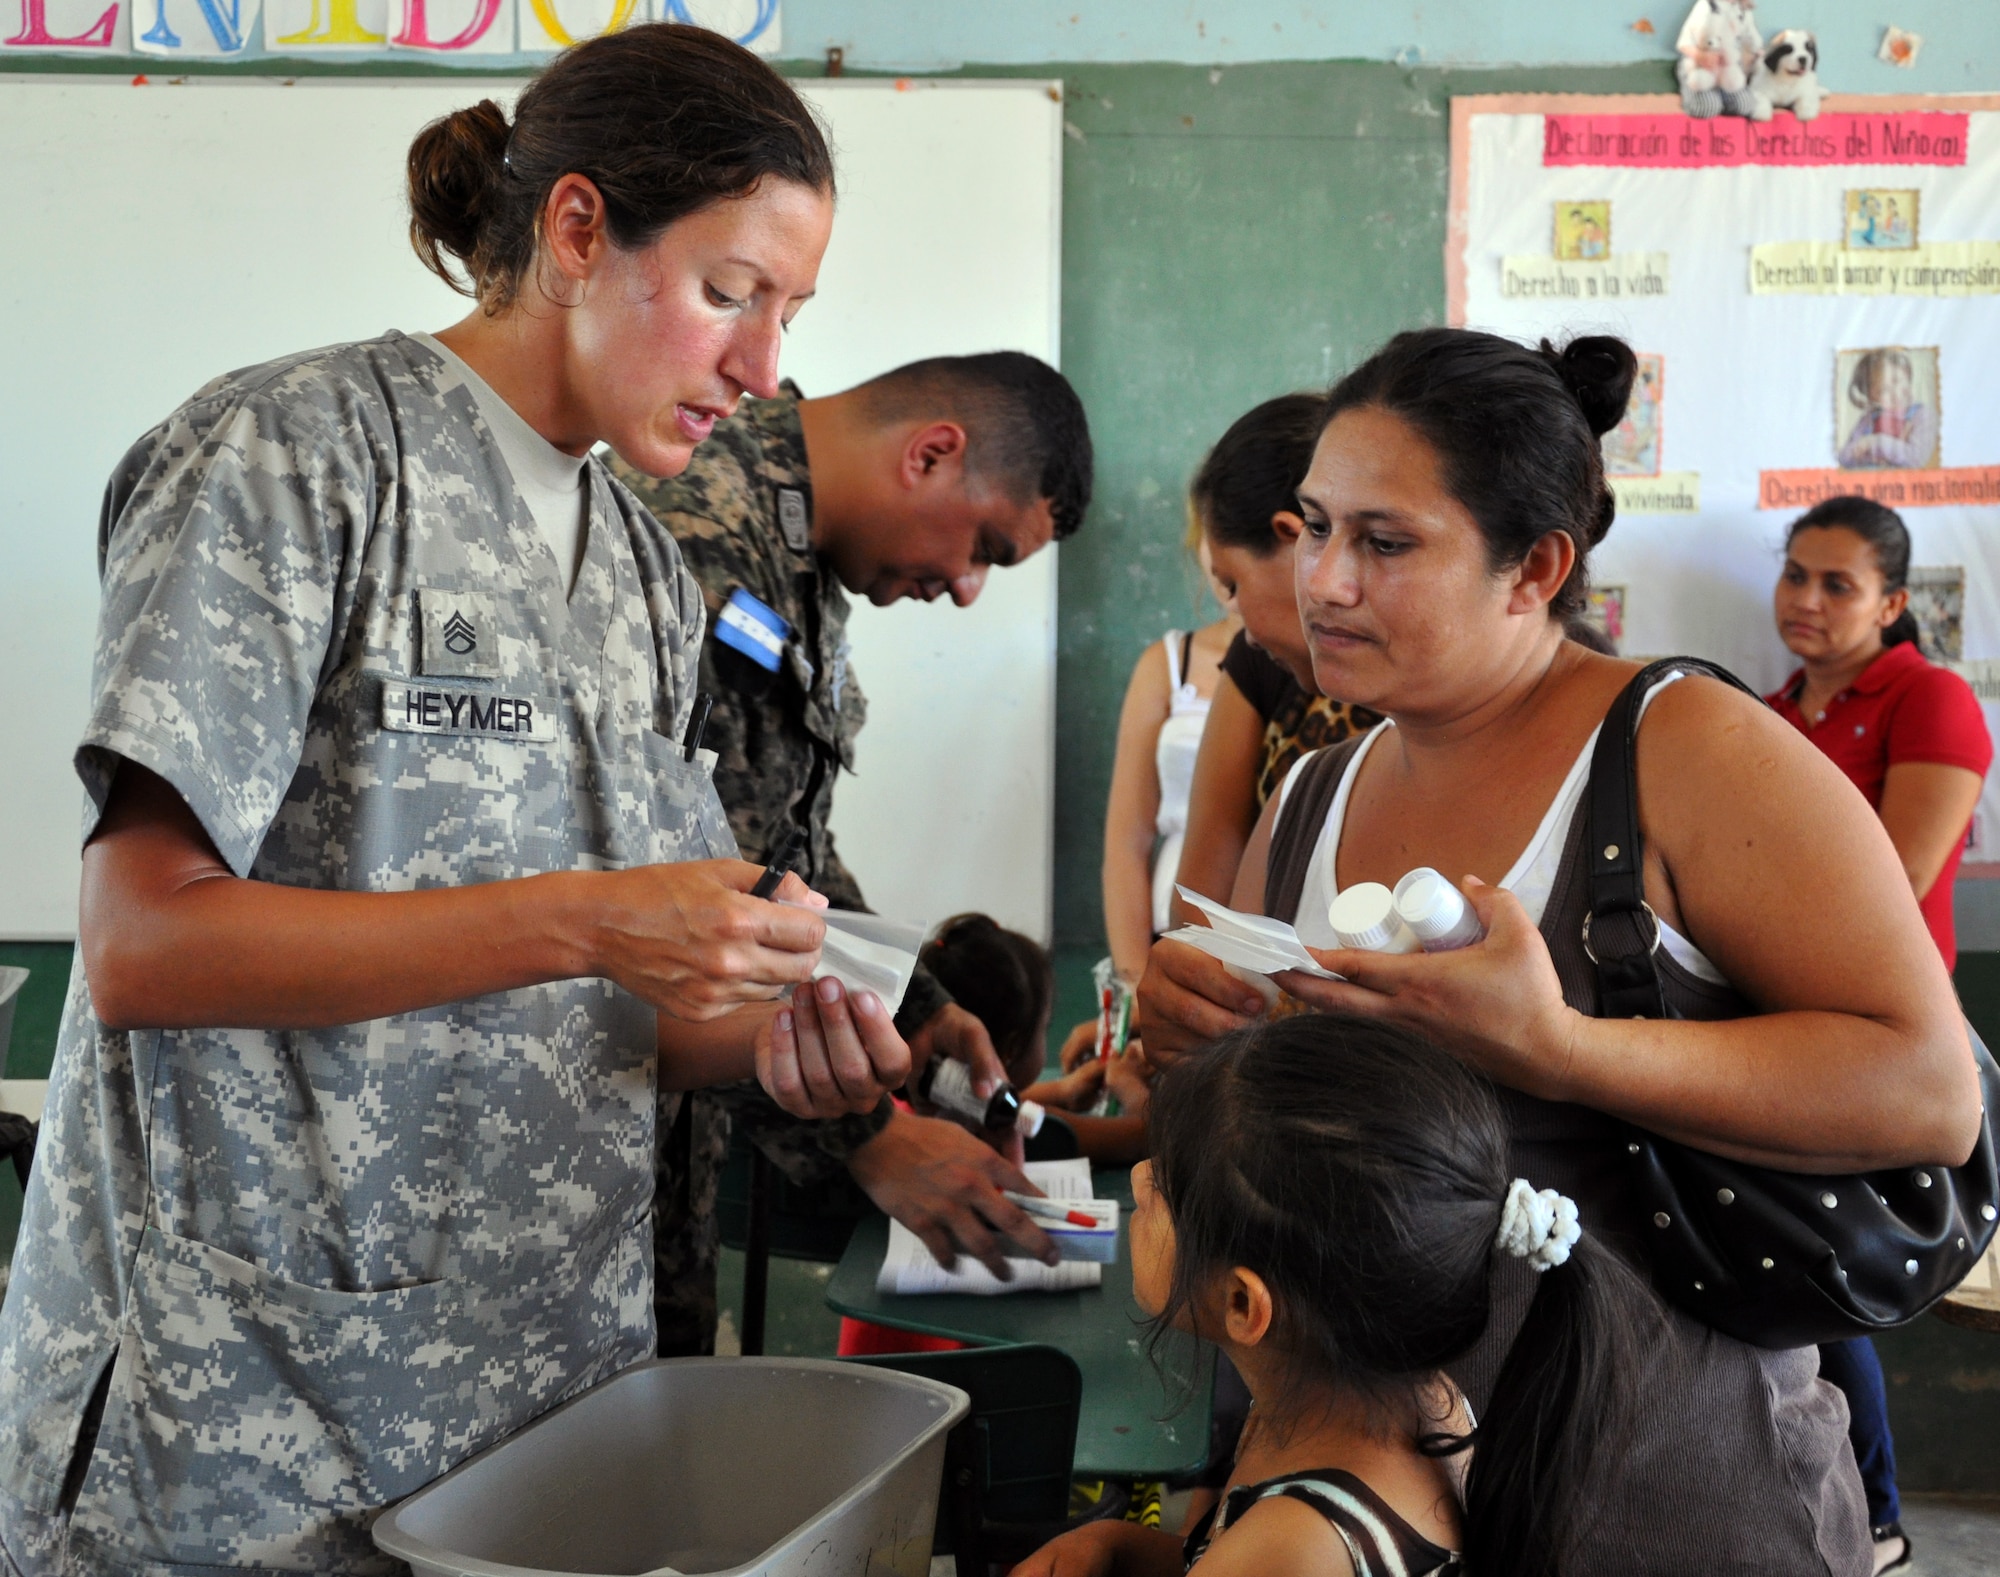 U.S. Army Staff Sgt. Miranda Heymer instructs a Honduran woman on taking medication during a Medical Readiness Training Exercise (MEDRETE) conducted by Joint Task Force-Bravo's Medical Element (MEDEL) in the village of Kele Kele, Department of Puerto Cortes, Honduras, Feb. 26, 2014.  MEDEL, with support from JTF-Bravo Joint Security Forces, Army Forces Battalion, and the 1-228th Aviation Regiment, partnered with the Honduran Ministry of Health, the Honduran Red Cross, and the Honduran military to provide medical care to more than 1,100 people over two days in Kele Kele and Caoba, two remote villages in the Puerto Cortes region of Honduras.  (Photo by U.S. Army Sgt. Courtney Kreft)